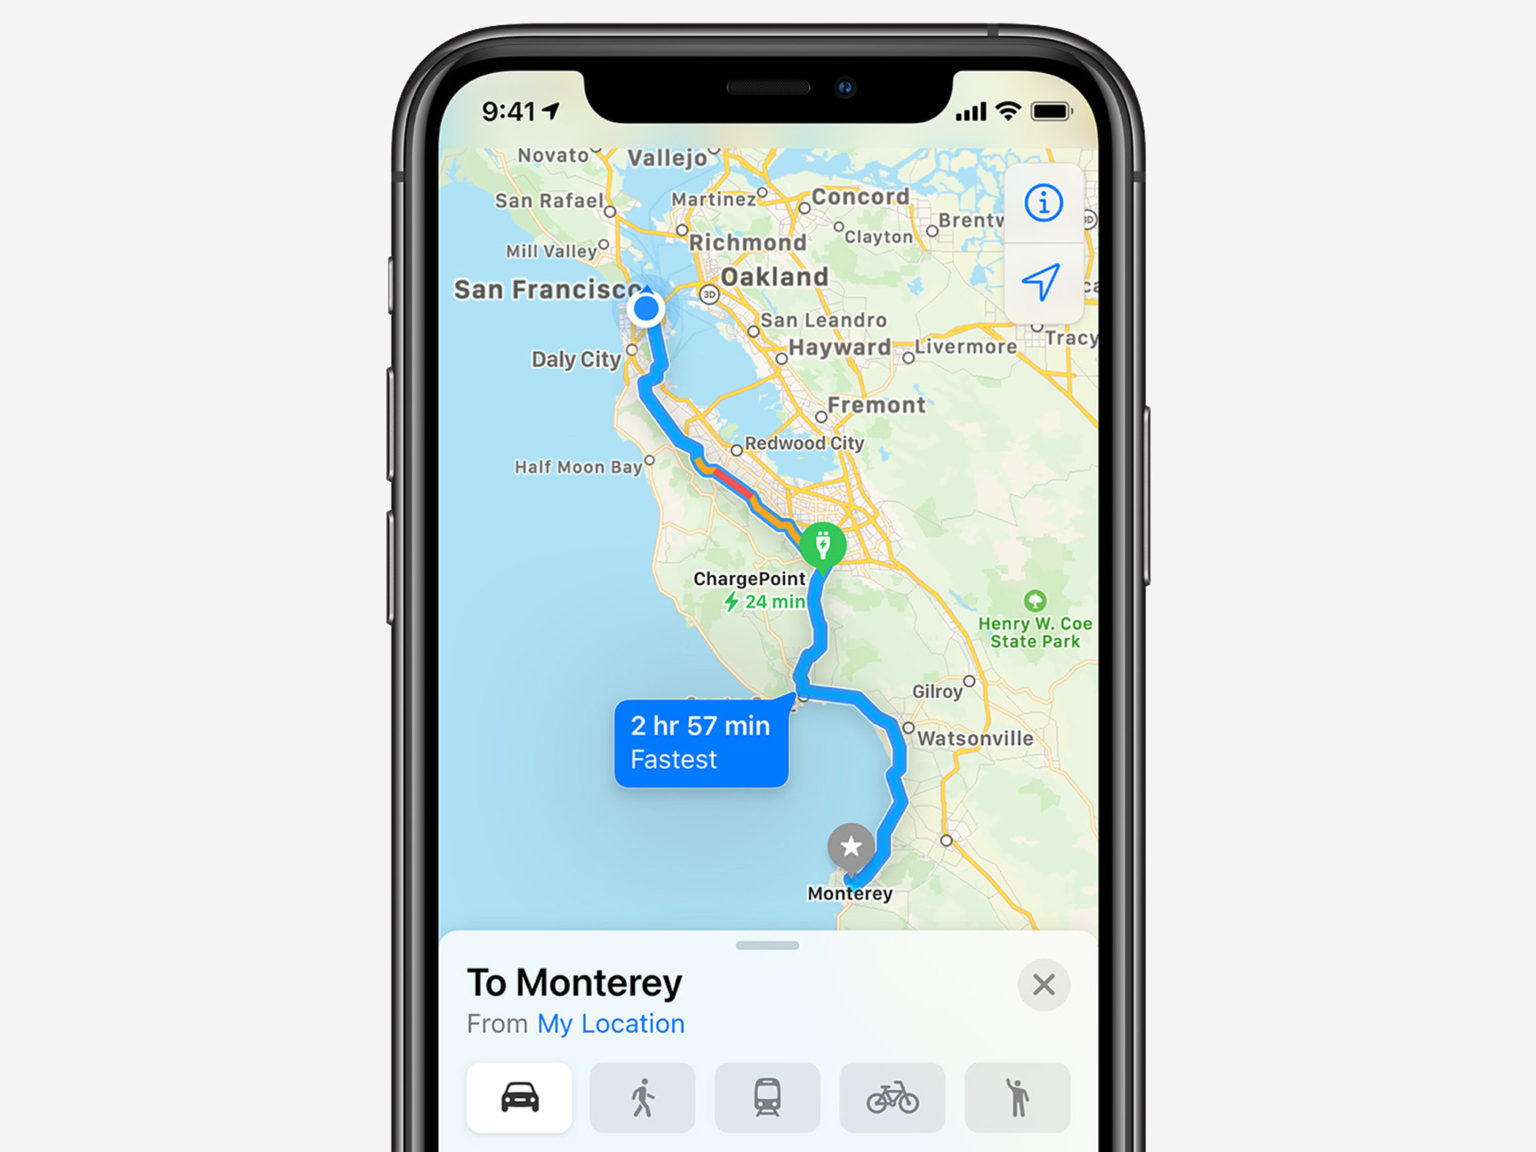 Electirc vehicle drivers will be able to utilize new Apple Maps functionality to help with route planning.